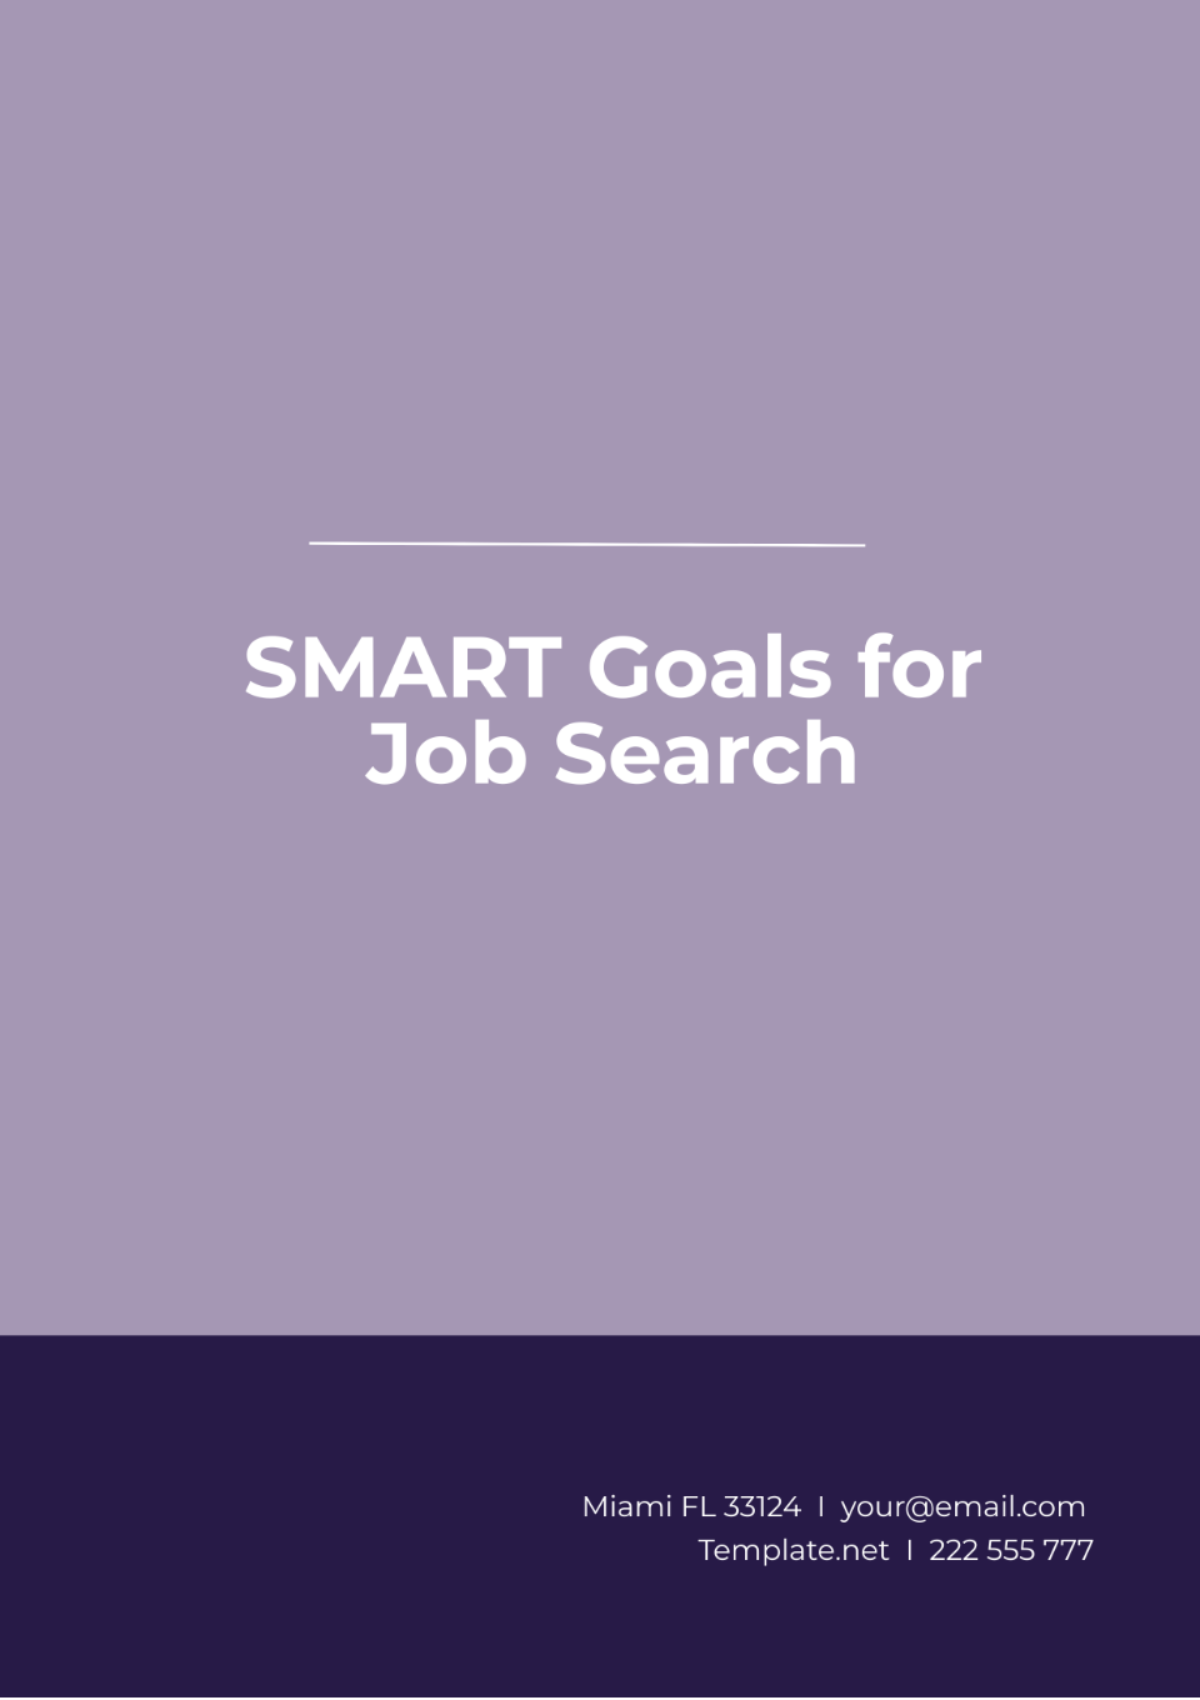 SMART Goals Template for Job Search